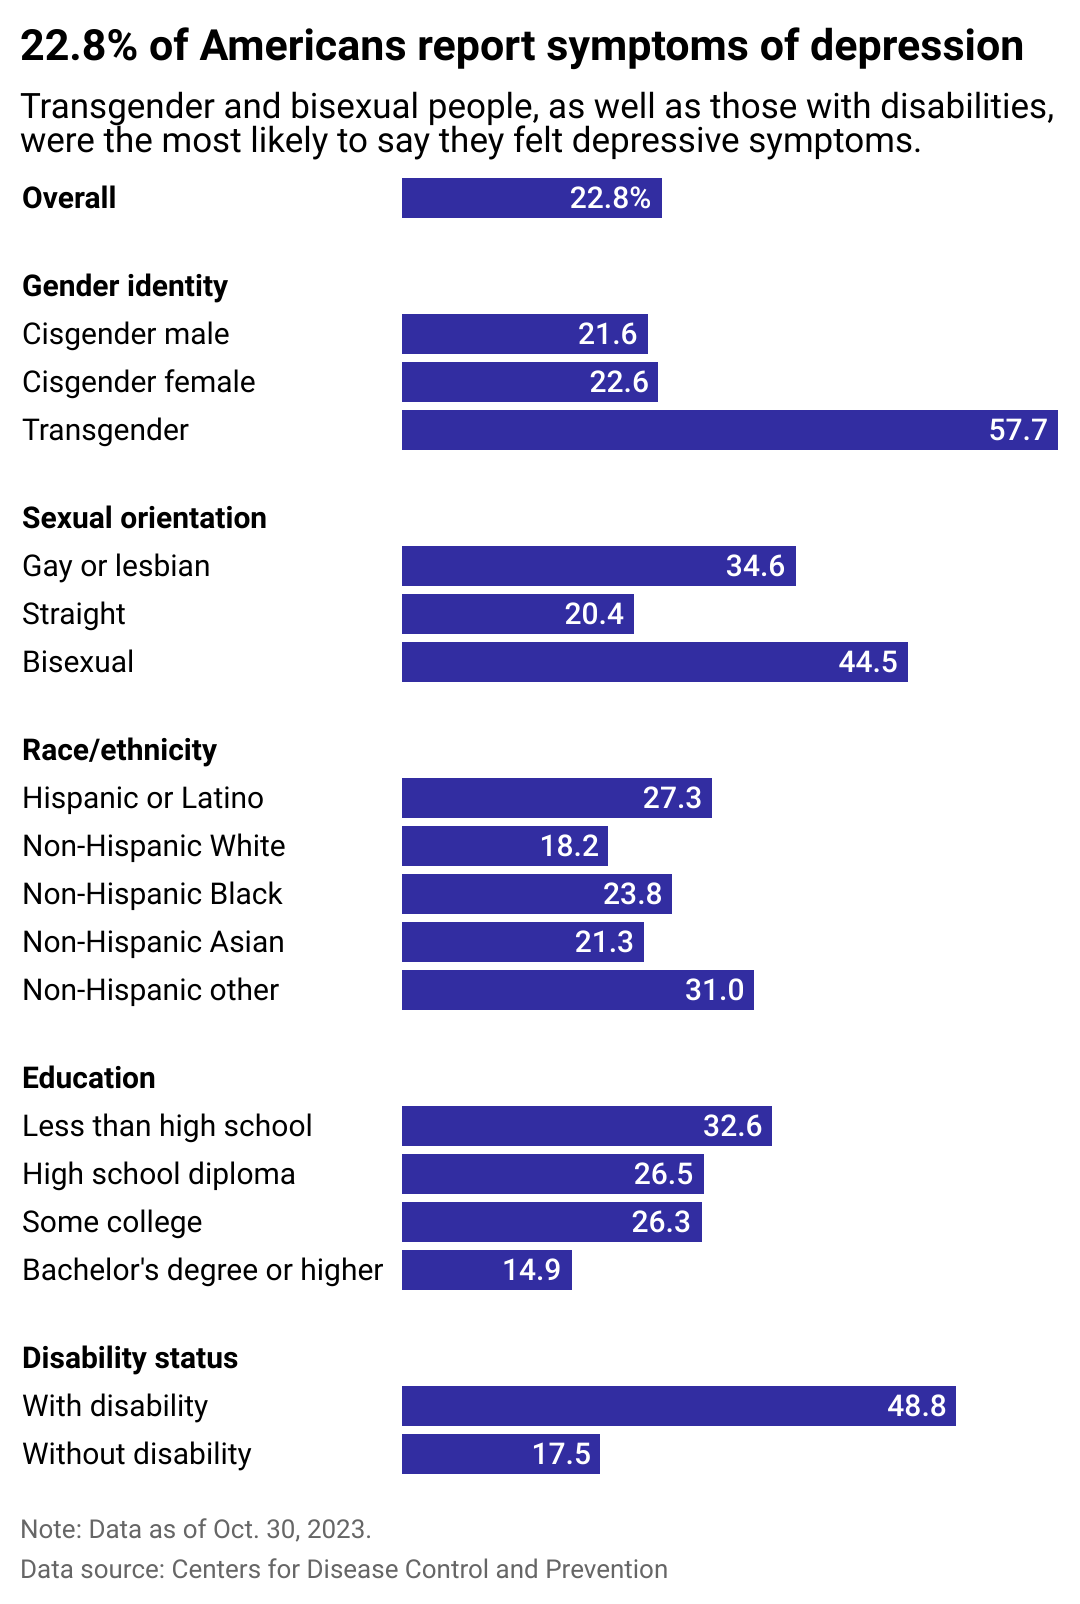 A bar chart breaking down what groups of Americans are the most likely to say they felt depressive symptoms. Transgender and bisexual people, as well as those with disabilities, are the most likely to say they are depressed.